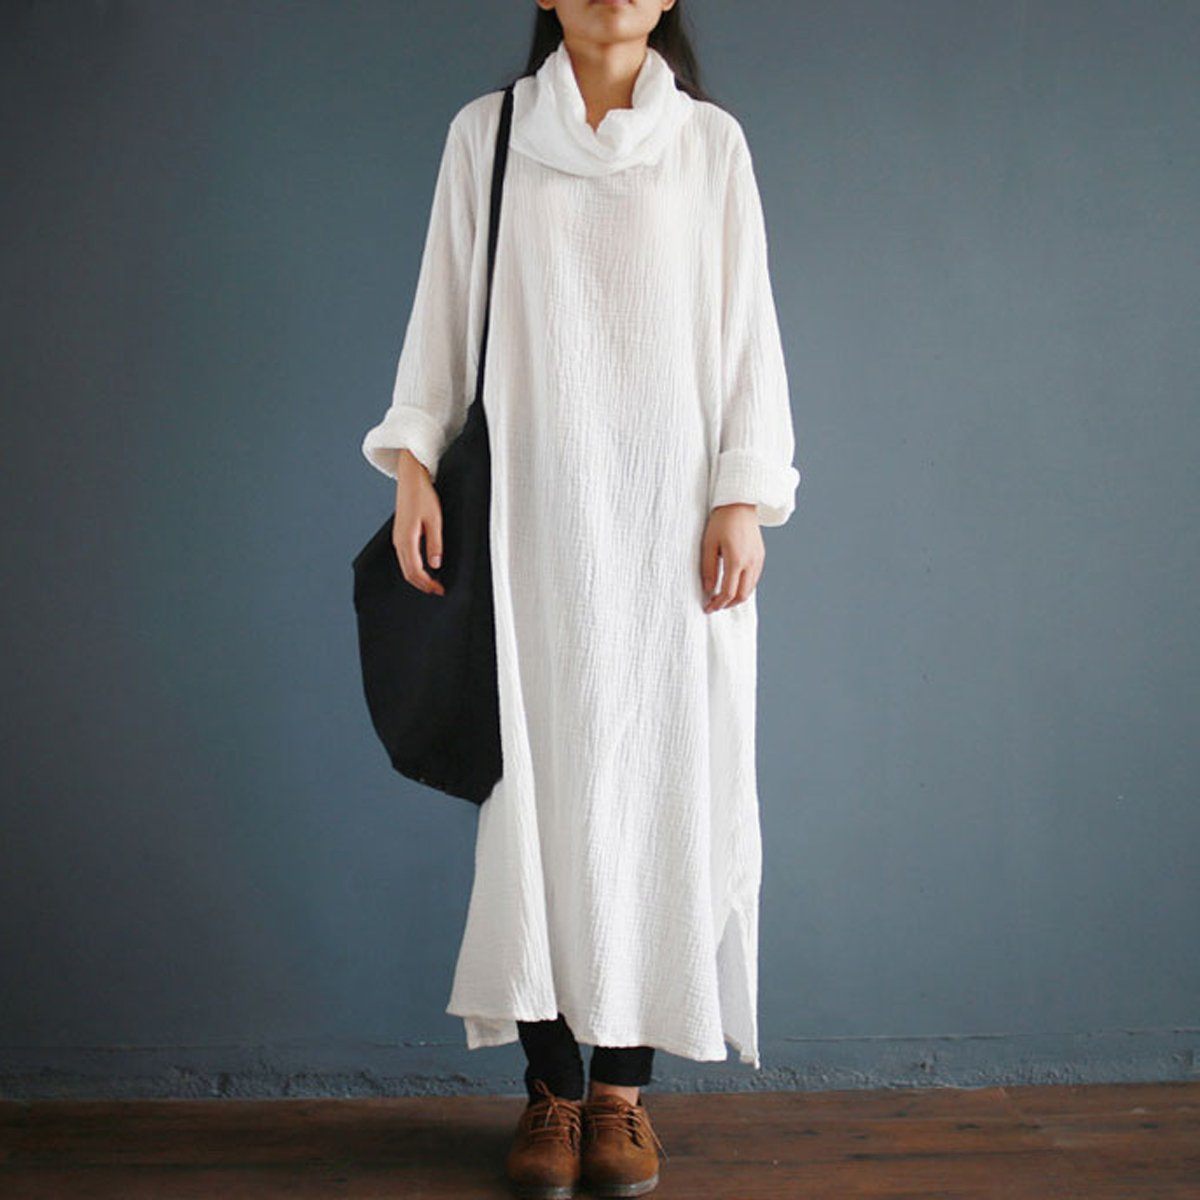 Cowl Neck Solid Casual Breathable Slit Maxi long Sleeve Dress For Women 2019 May New One Size White 